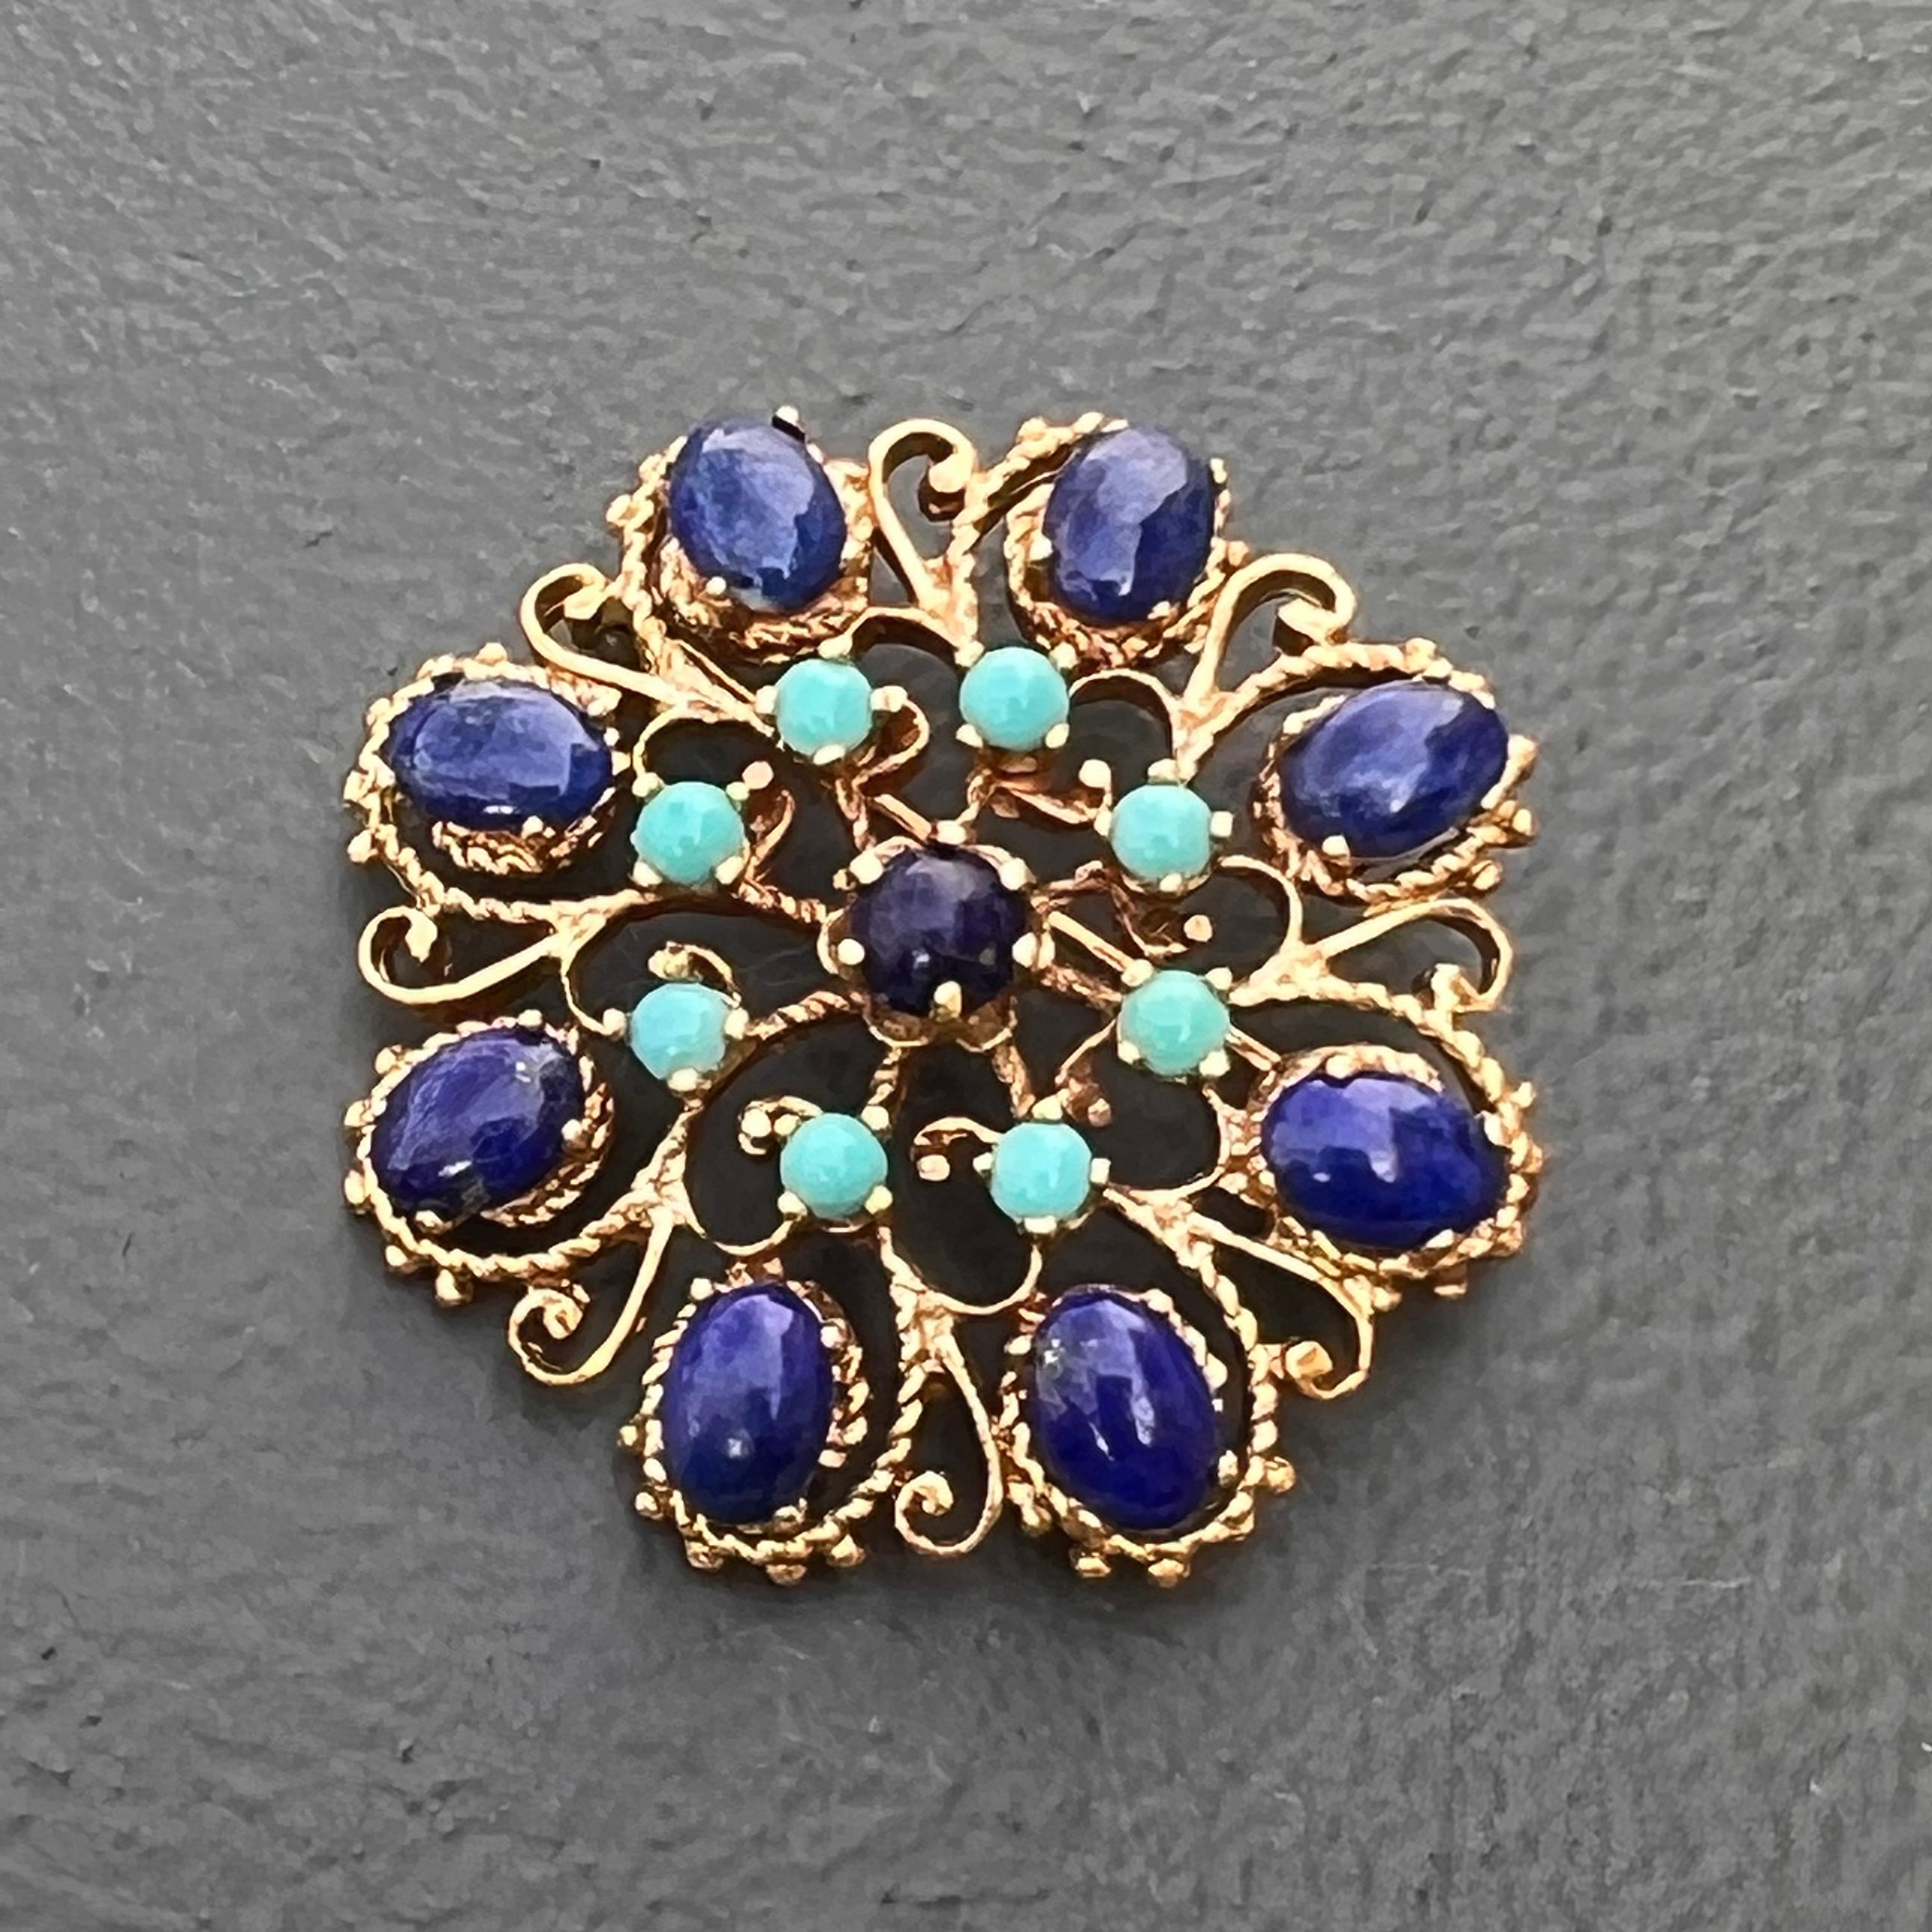 Gorgeous vintage Victorian revival 14kt solid gold pin/brooch with prong set lapis and Persian turquoise stones set on an open work base and beaded boarder .Rollover clasp .
marked 14kt on backside .
Oval lapis stones are approx. 1/4 inches x 1/8